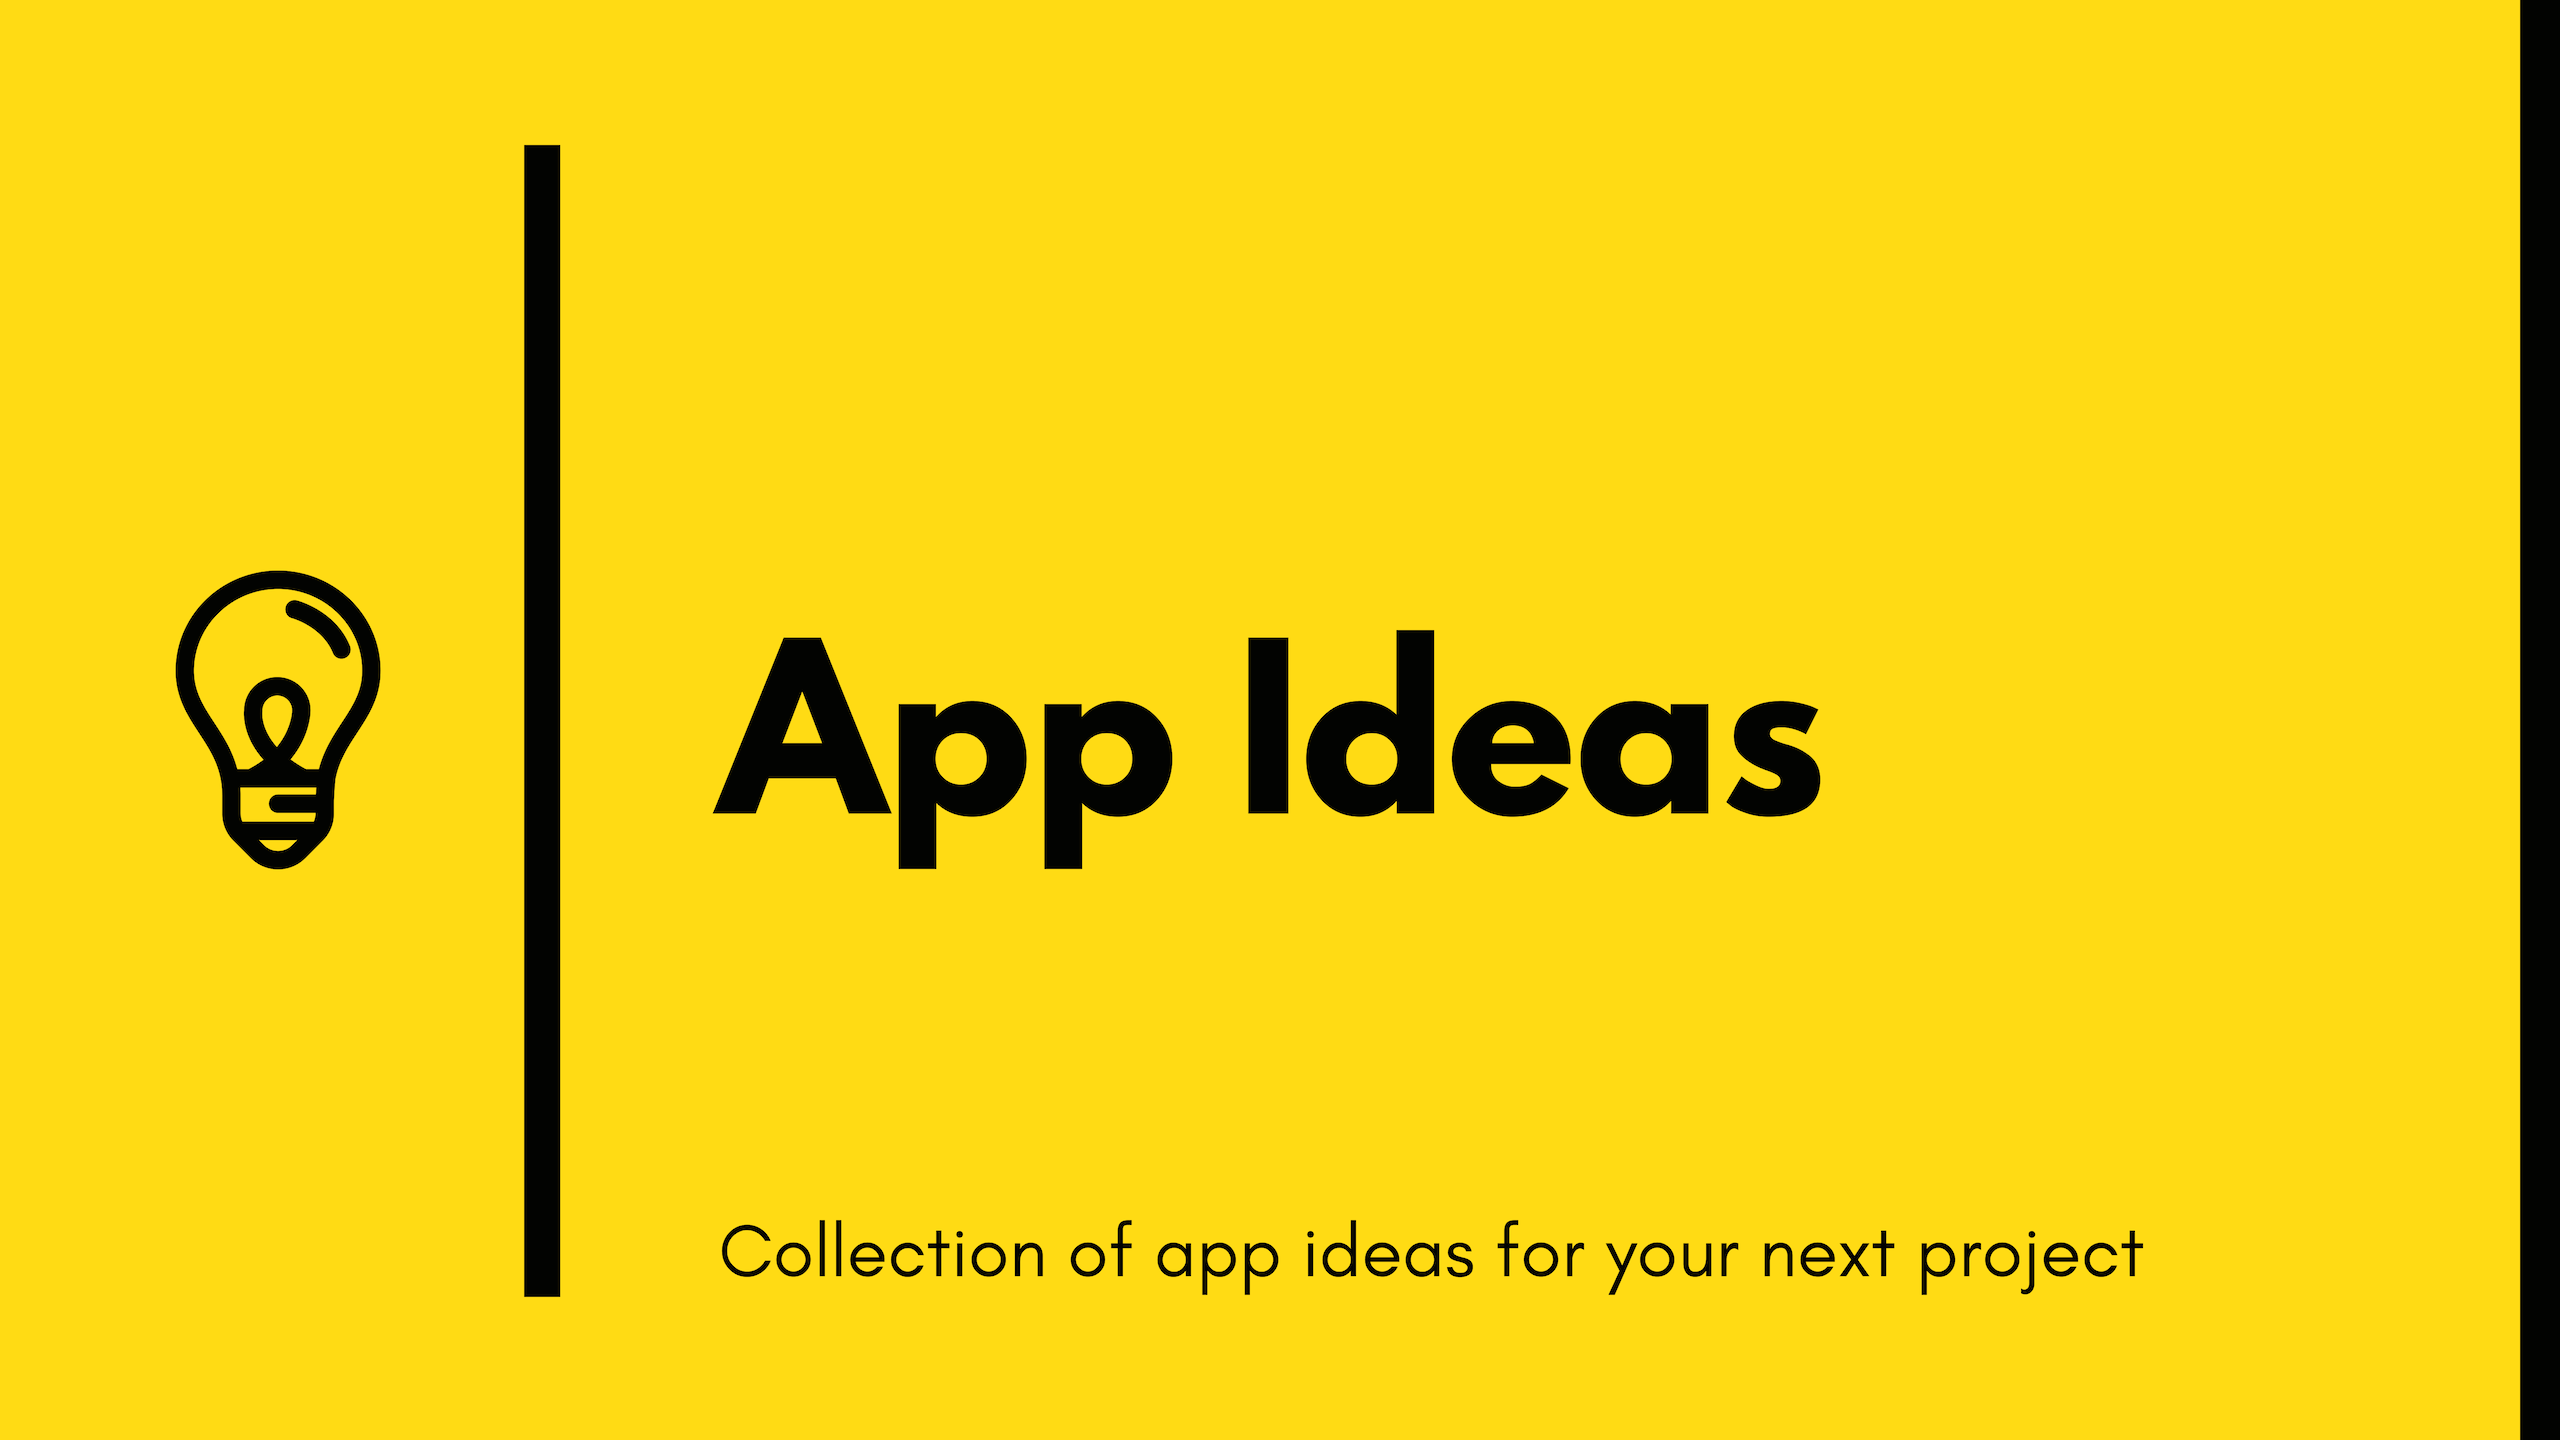 A collection of app ideas, great for improving your coding skills 💪